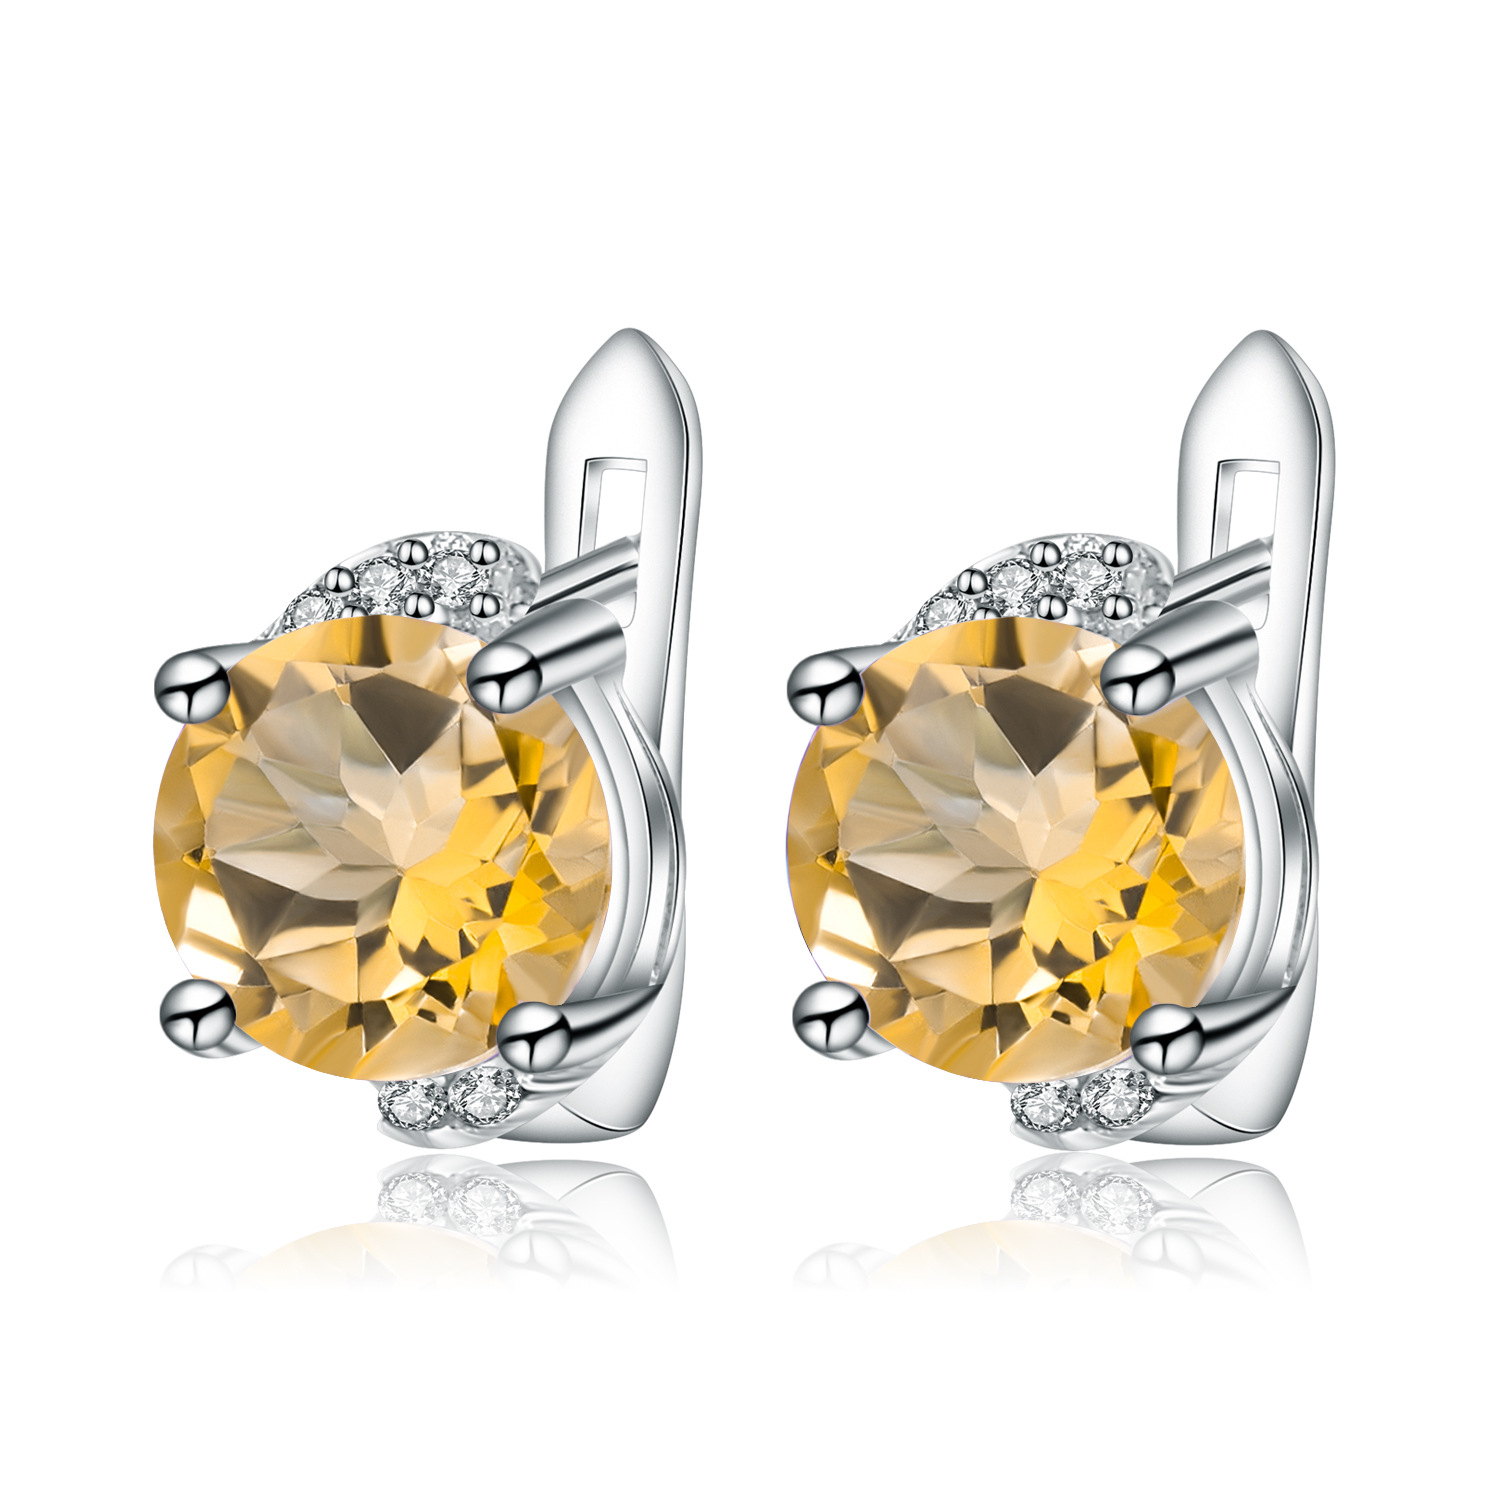 Natural Stone Collection Classic Design S925 Sterling Silver Earrings-BlingRunway